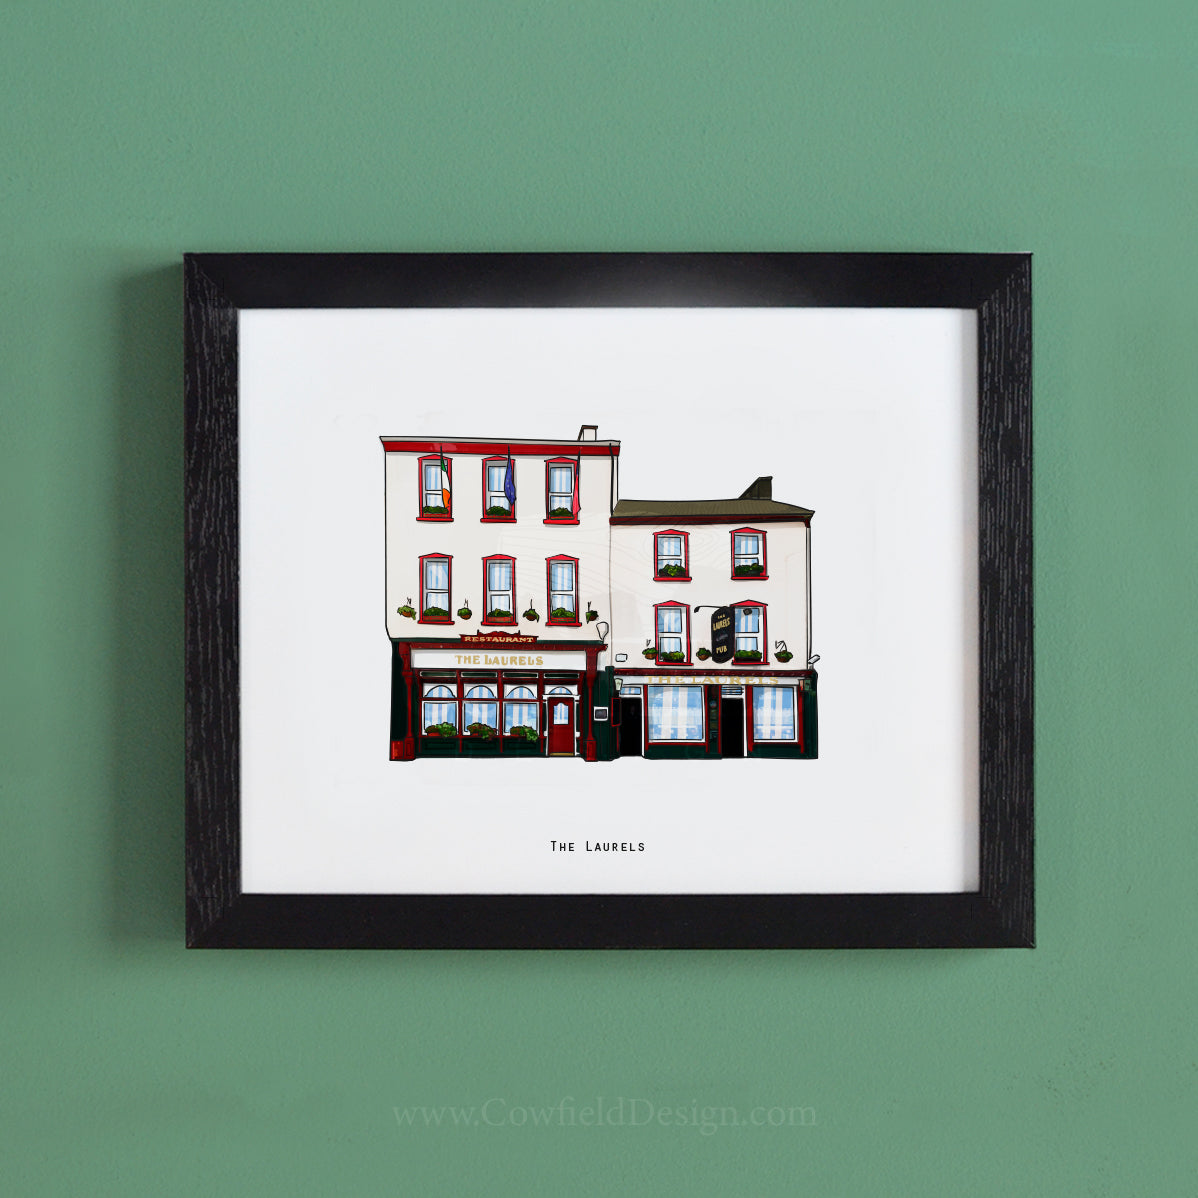 The Laurels Illustrated Pubs of Kerry